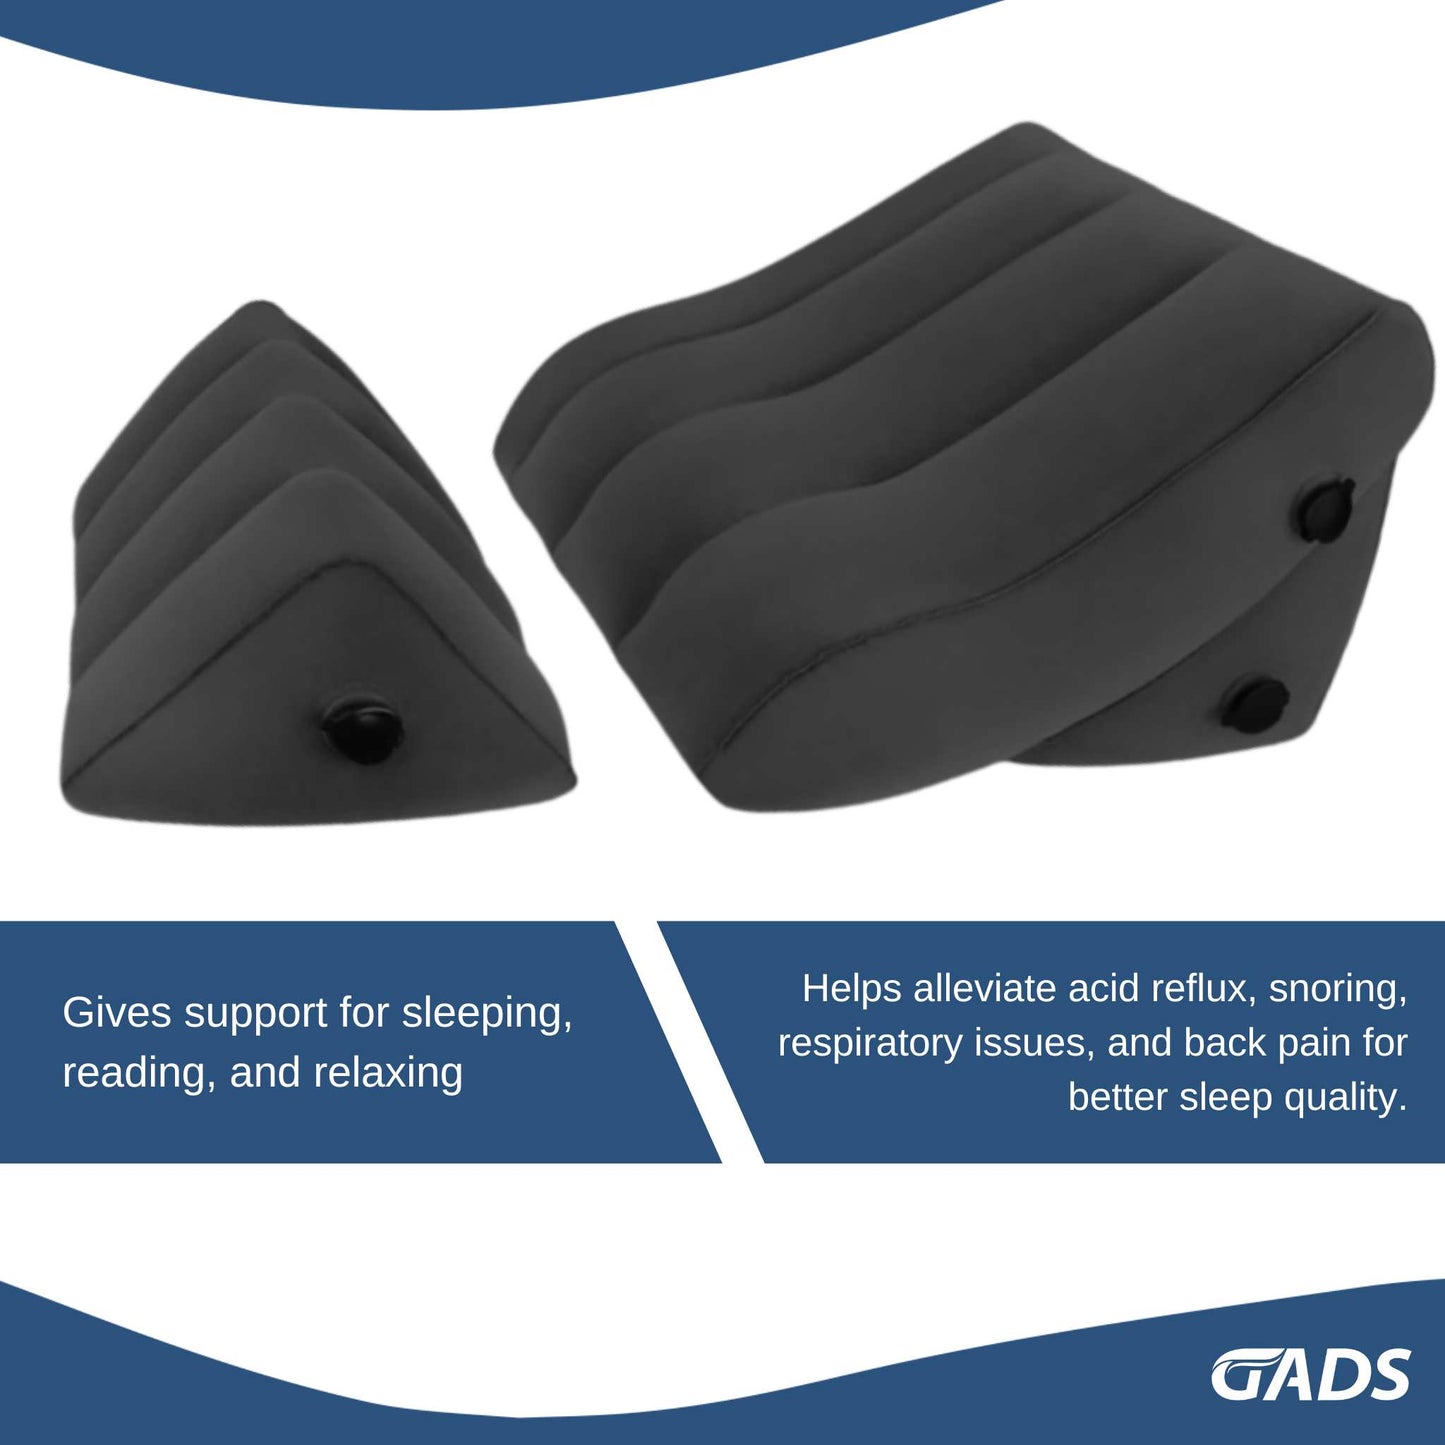 GADS Wedge Pillow Set - Multi-Use Support for Sleeping, Reading, and Elevated Comfort